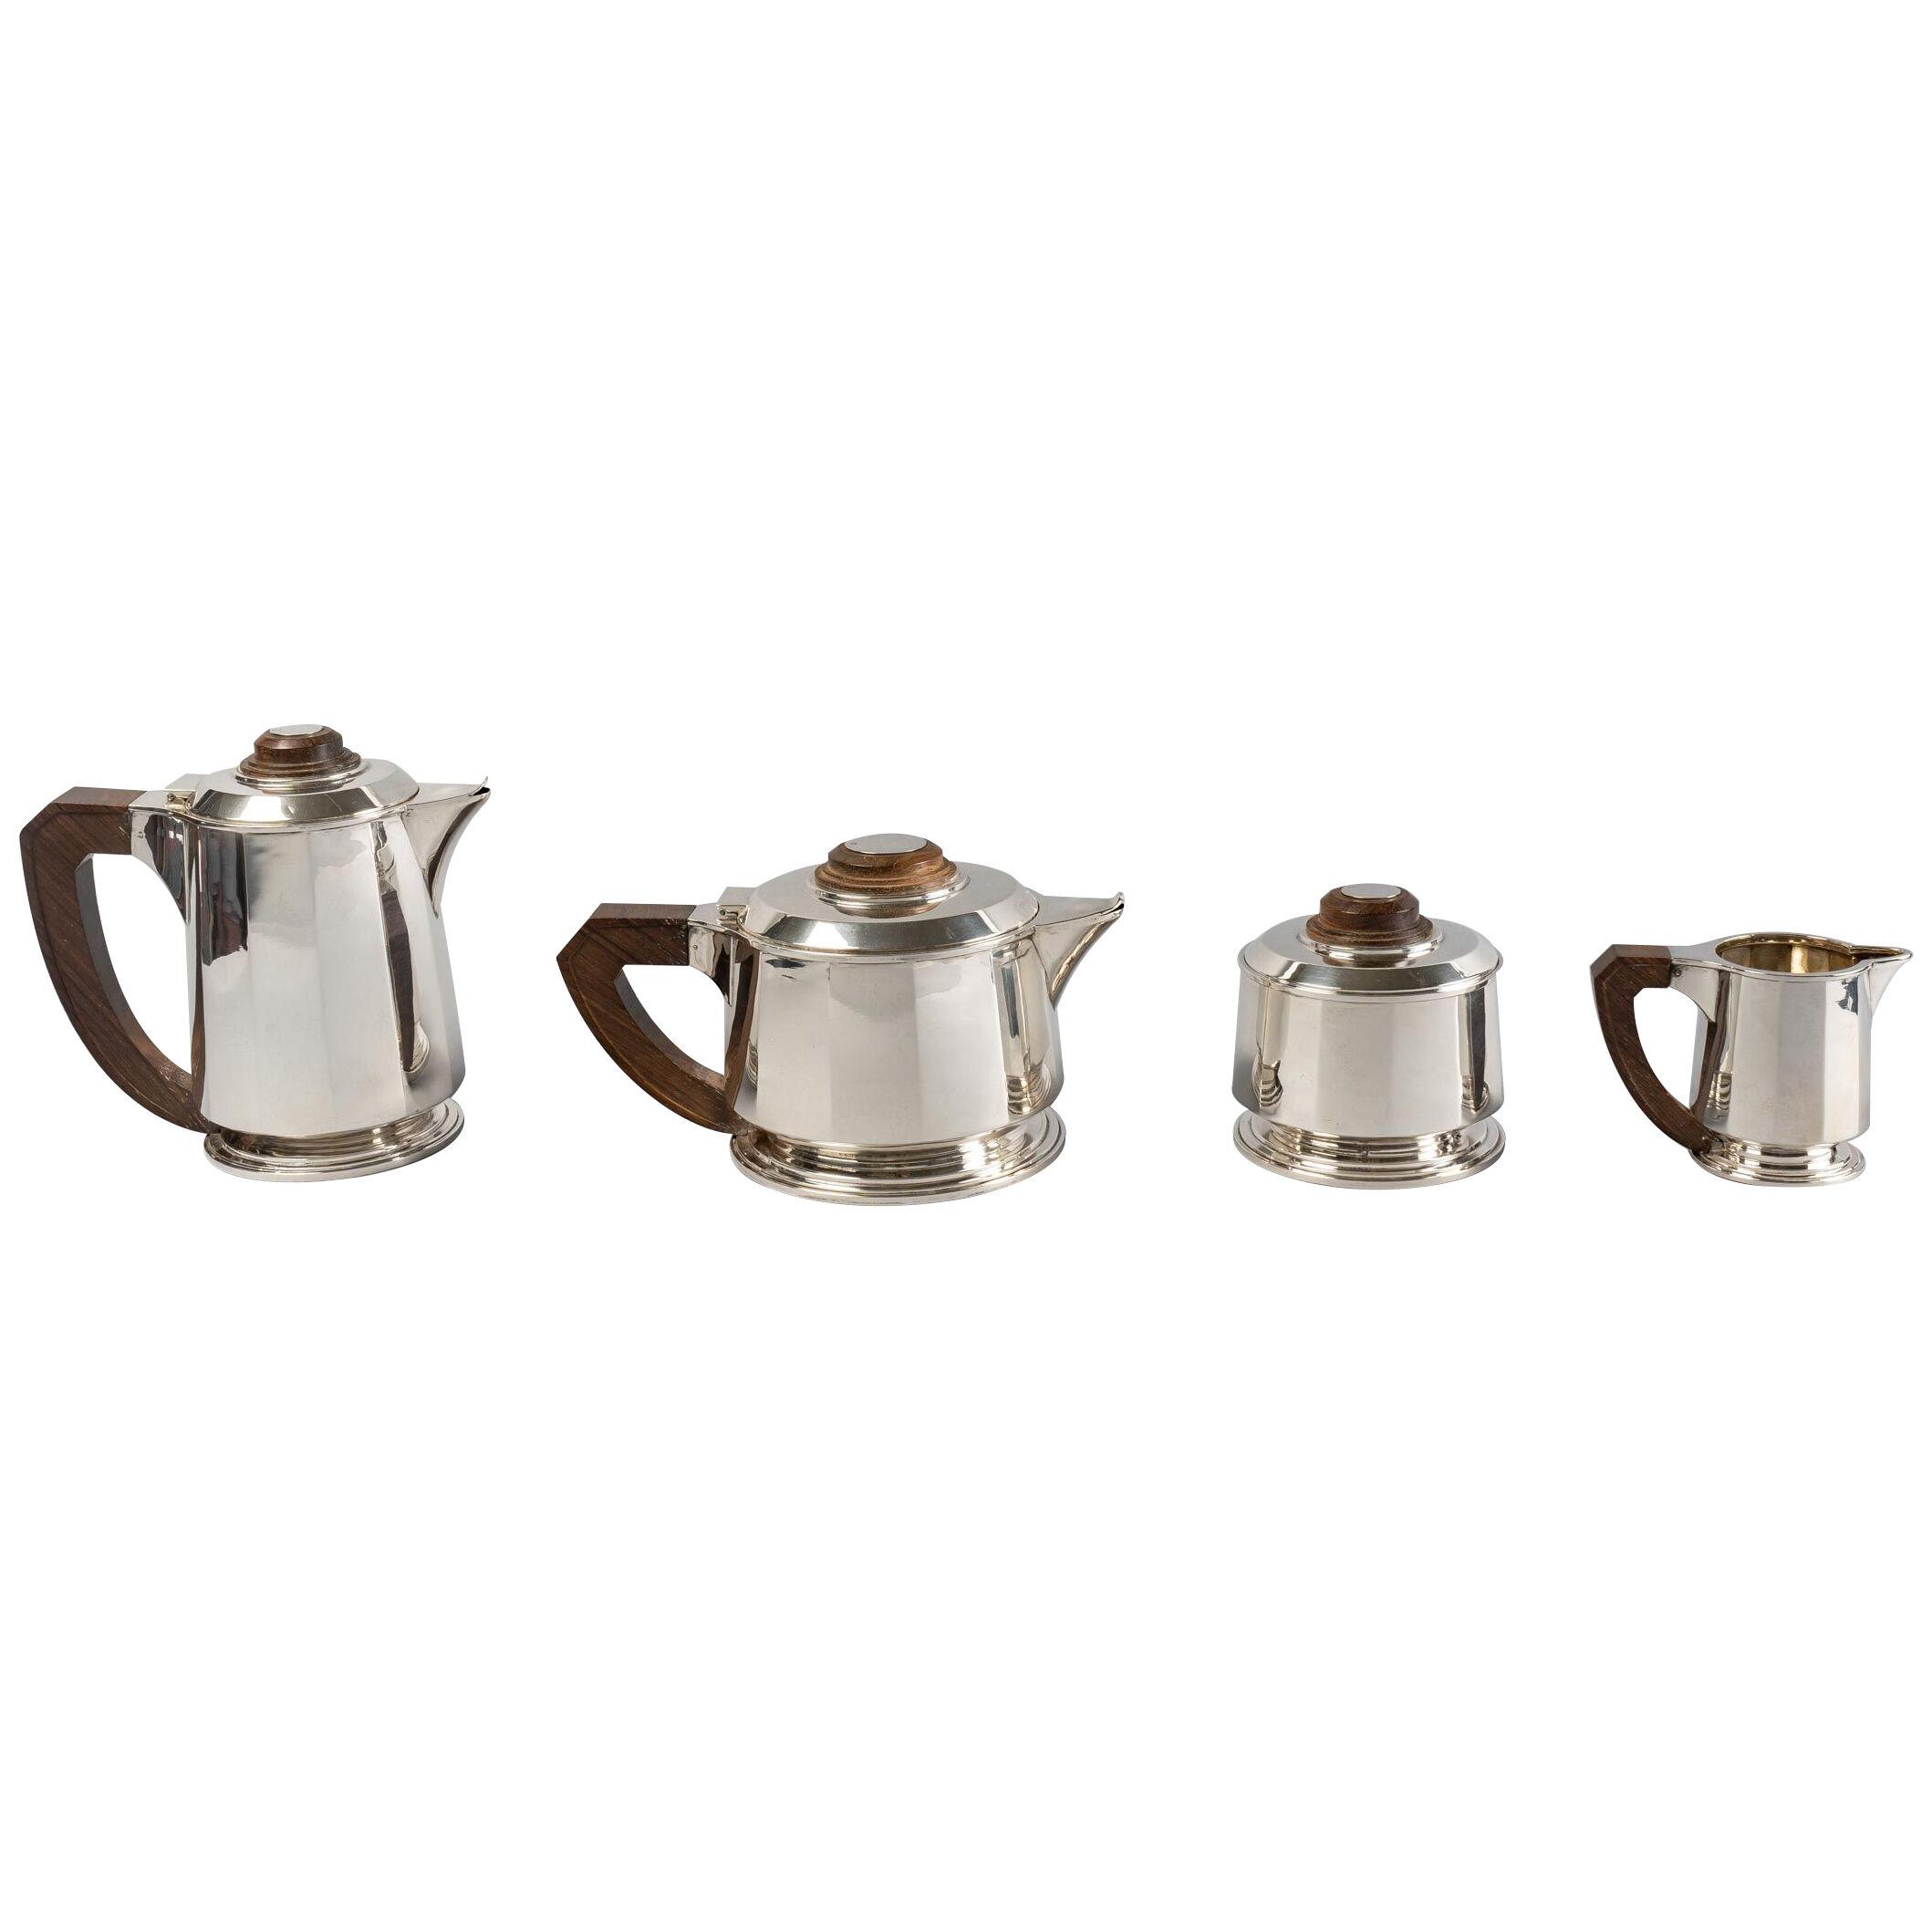 1925 Puiforcat - Tea And Coffee Service In Sterling Silver And Rosewood